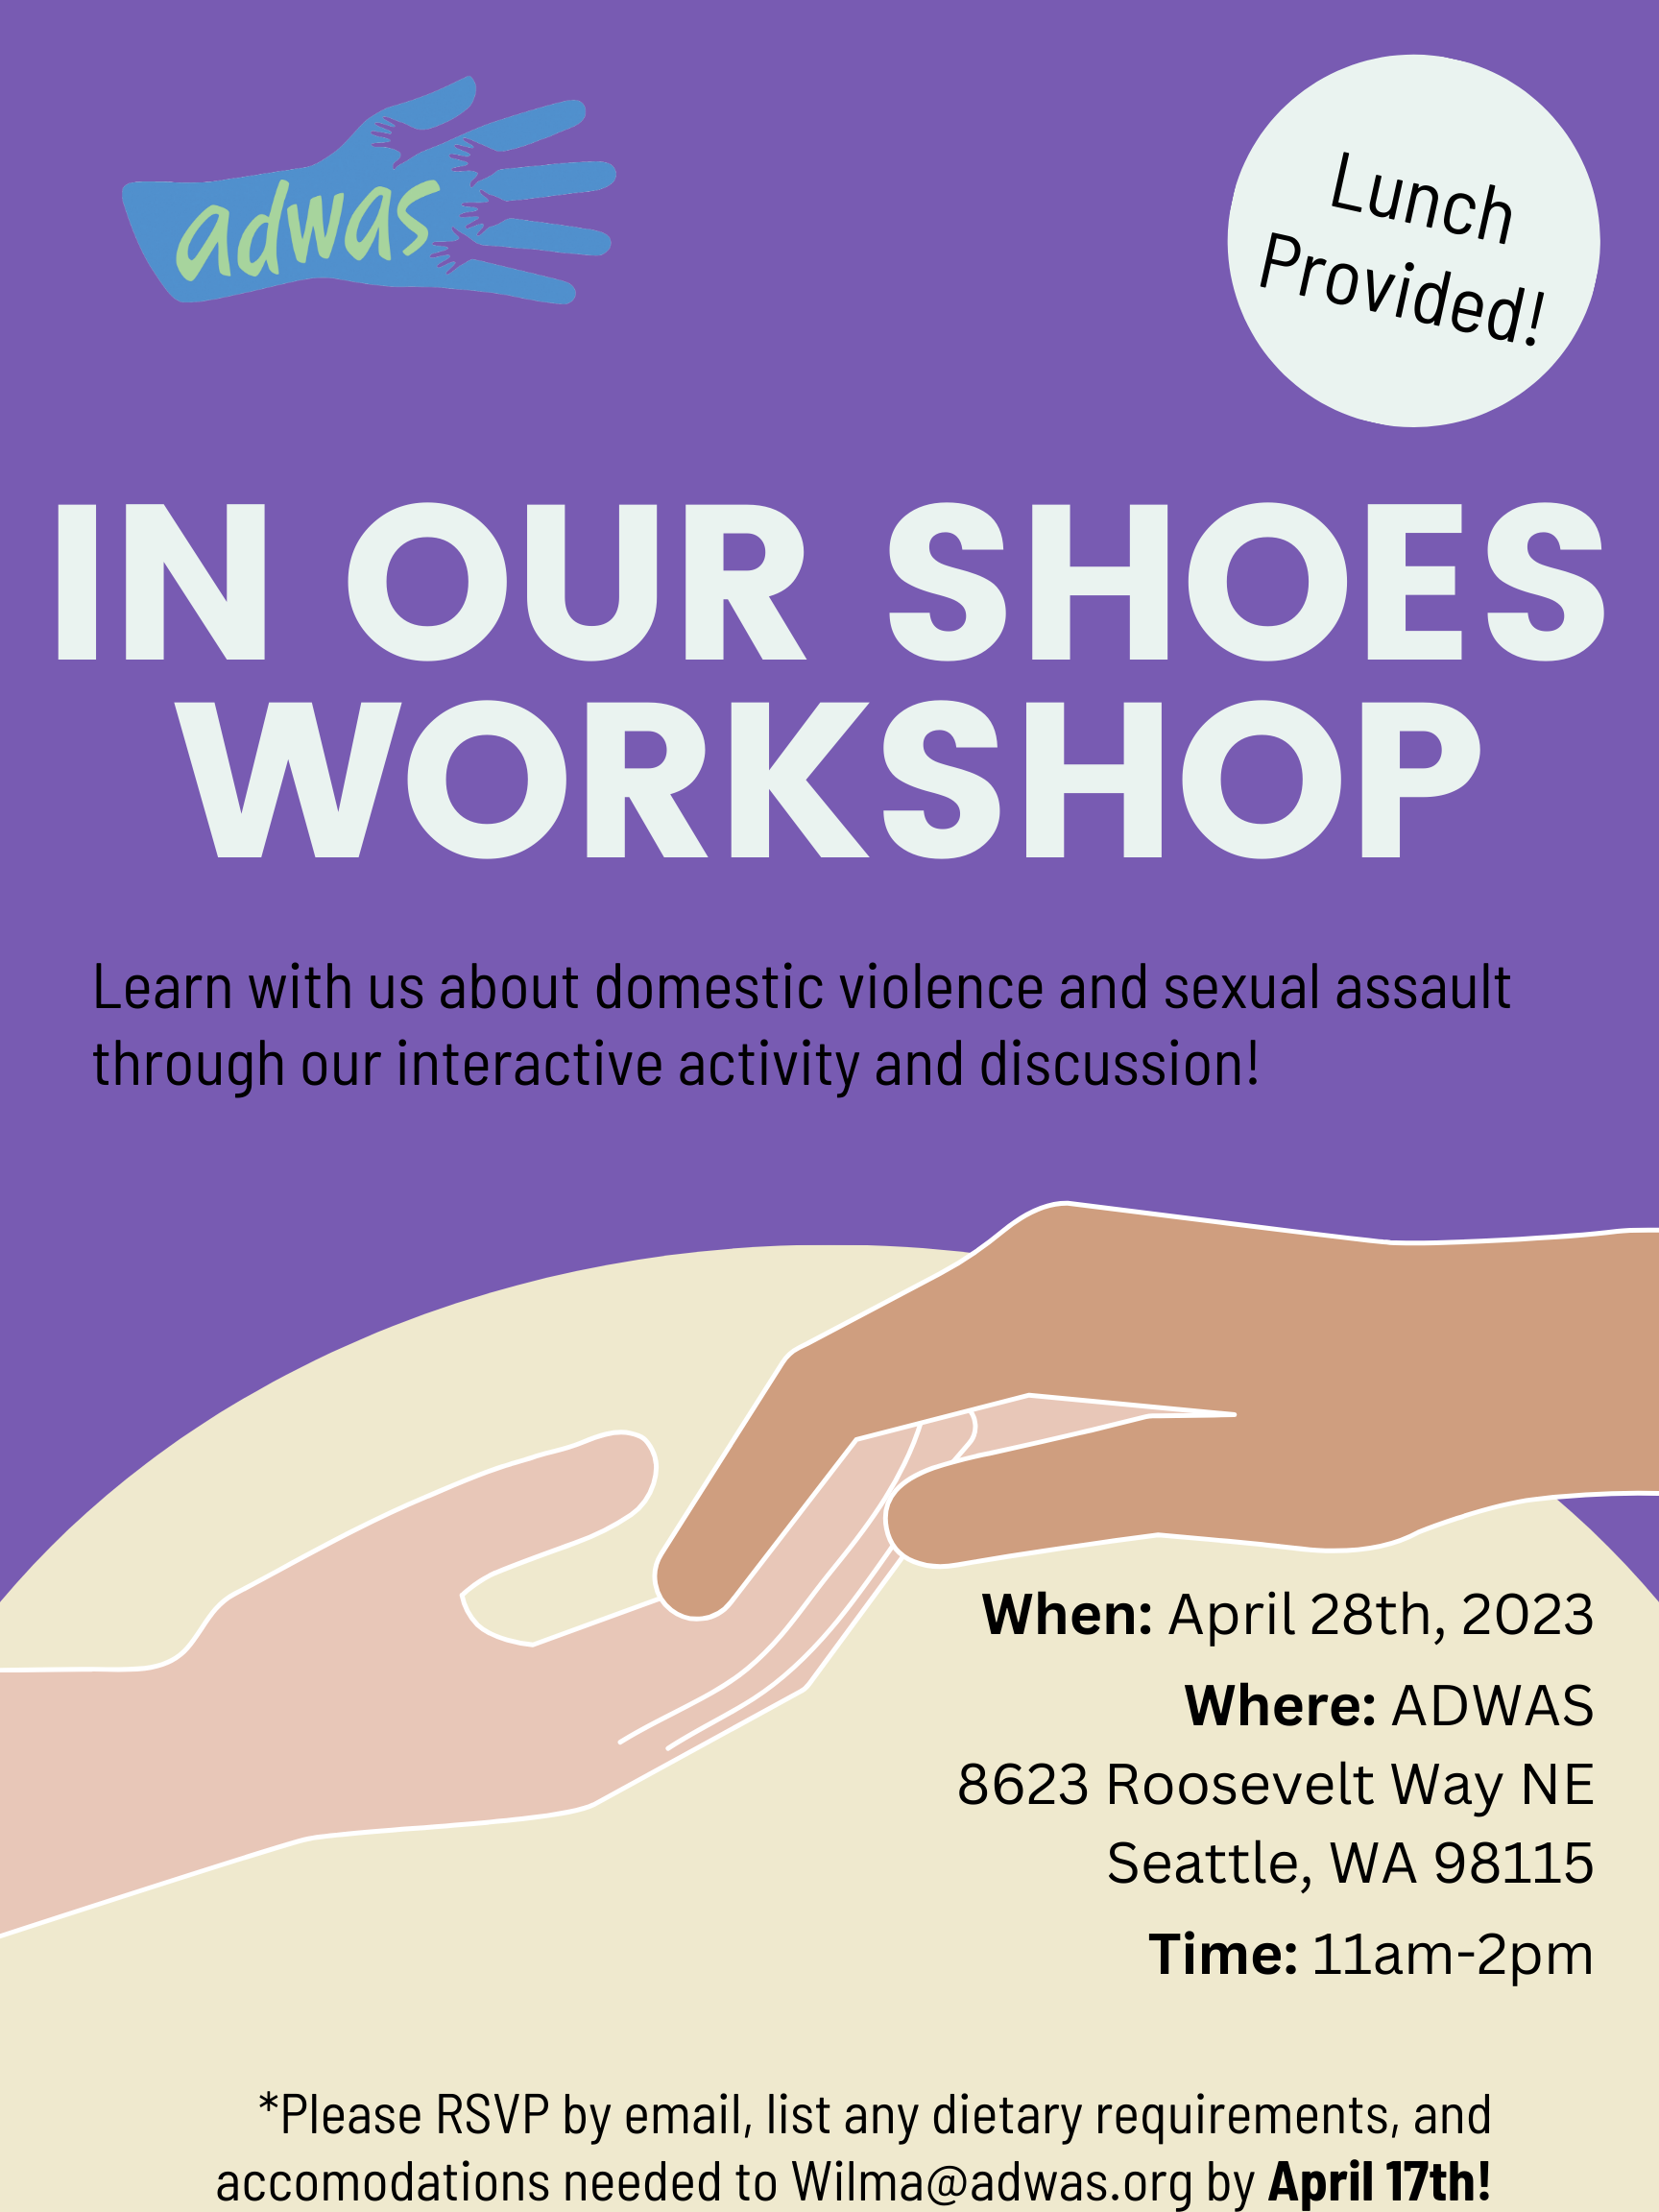 In our shoes workshop flyer